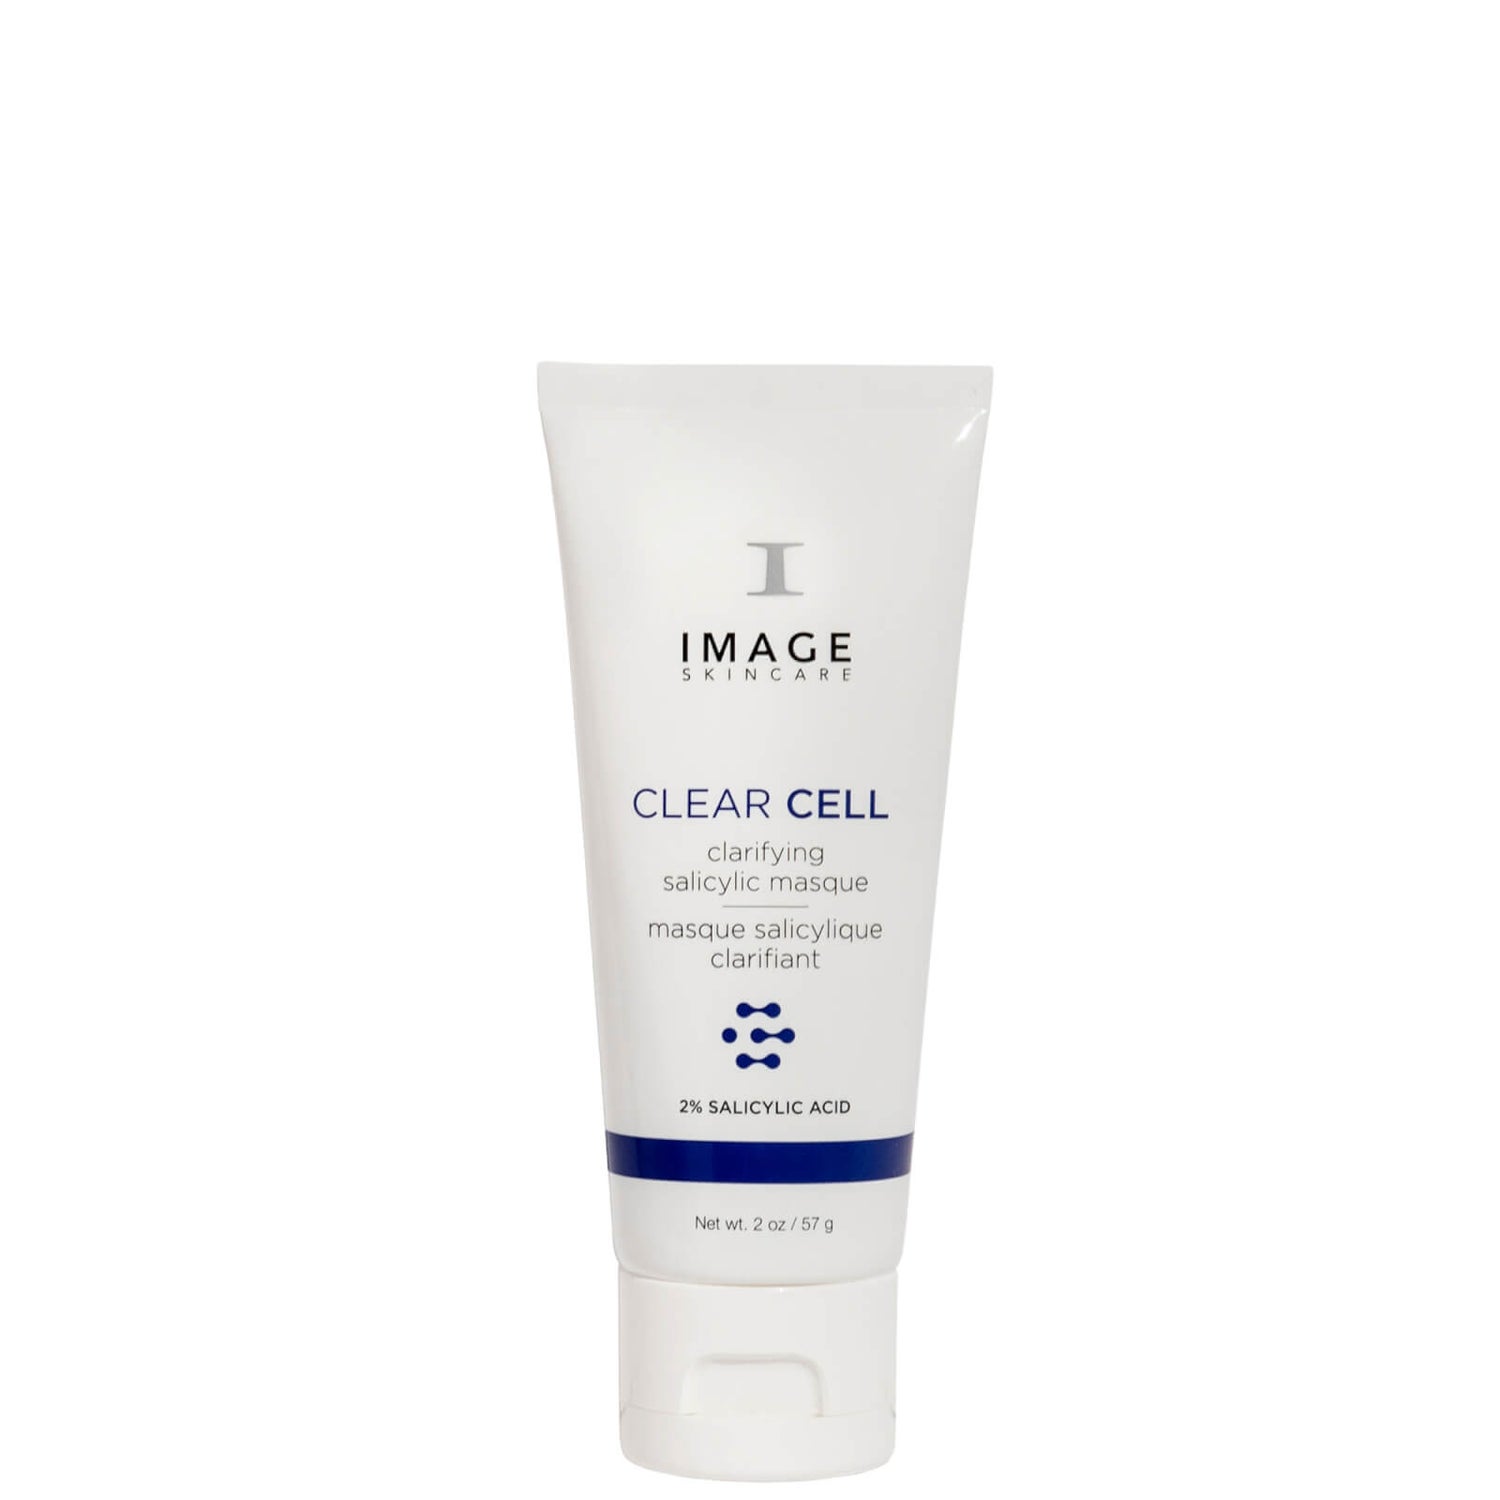 IMAGE Skincare CLEAR CELL Medicated Acne Masque (2 oz.)